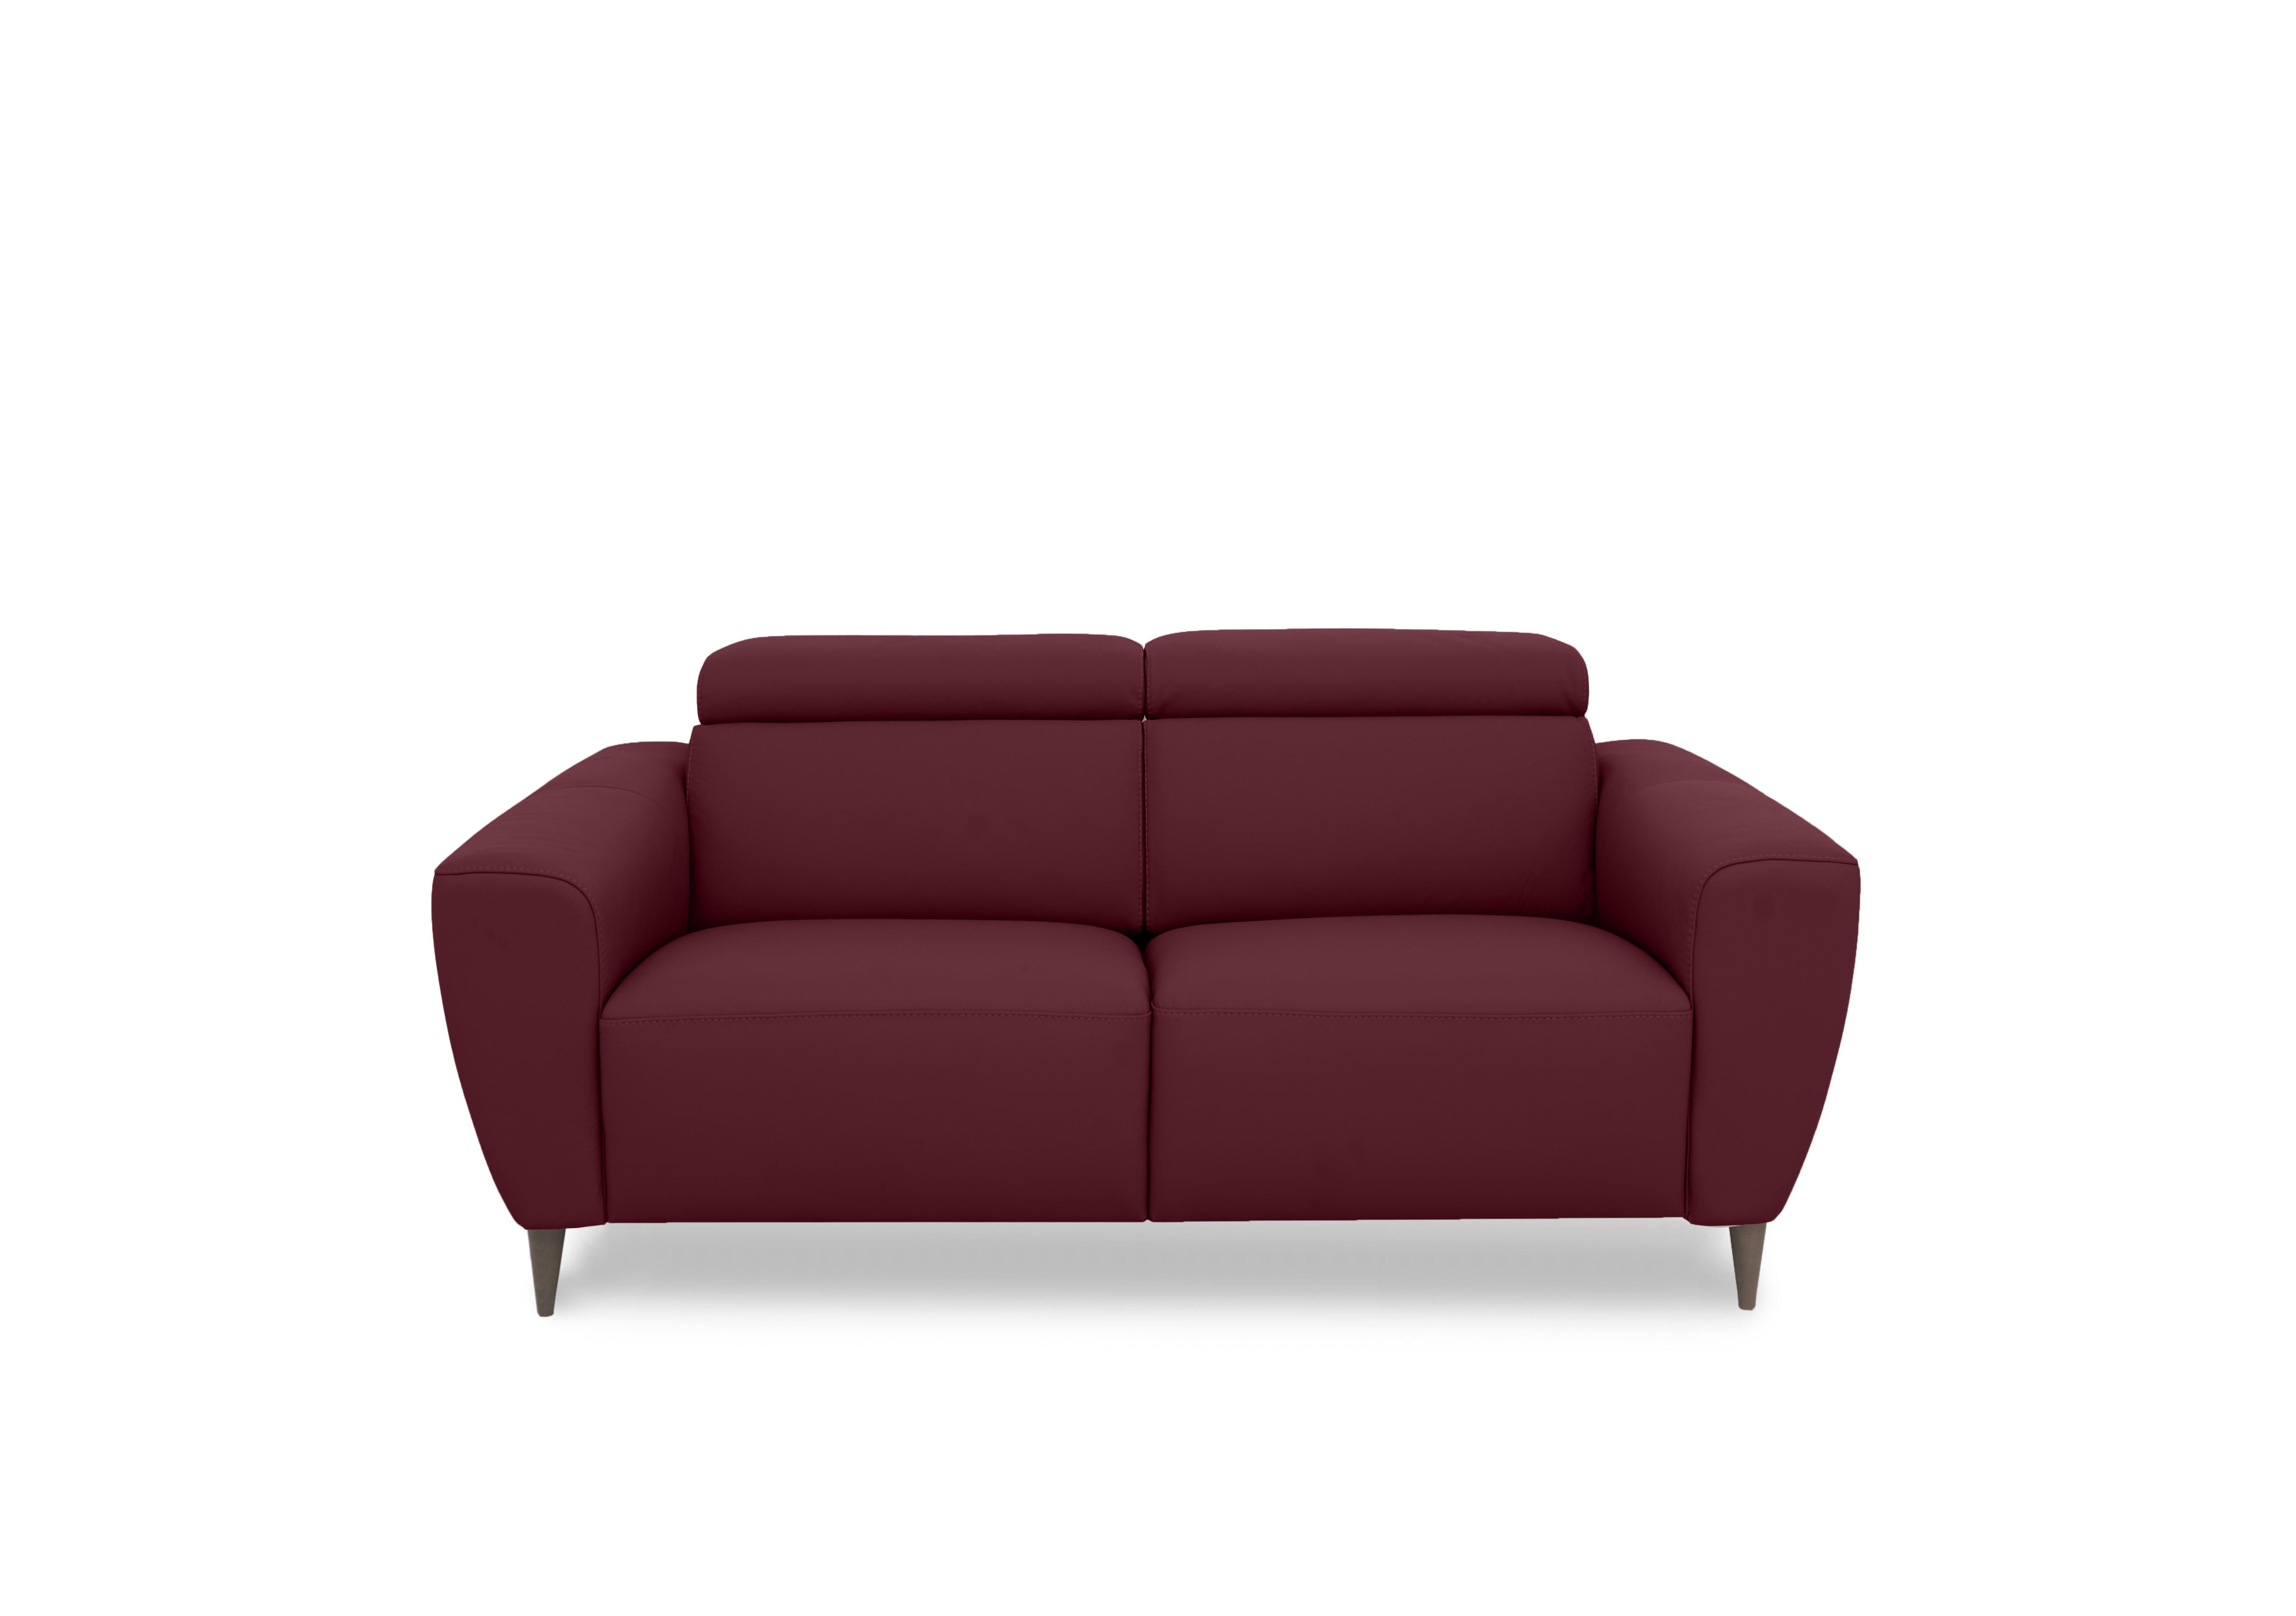 Milano 2 Seater Leather Sofa in 1521 Dali Bordeaux To Ft on Furniture Village